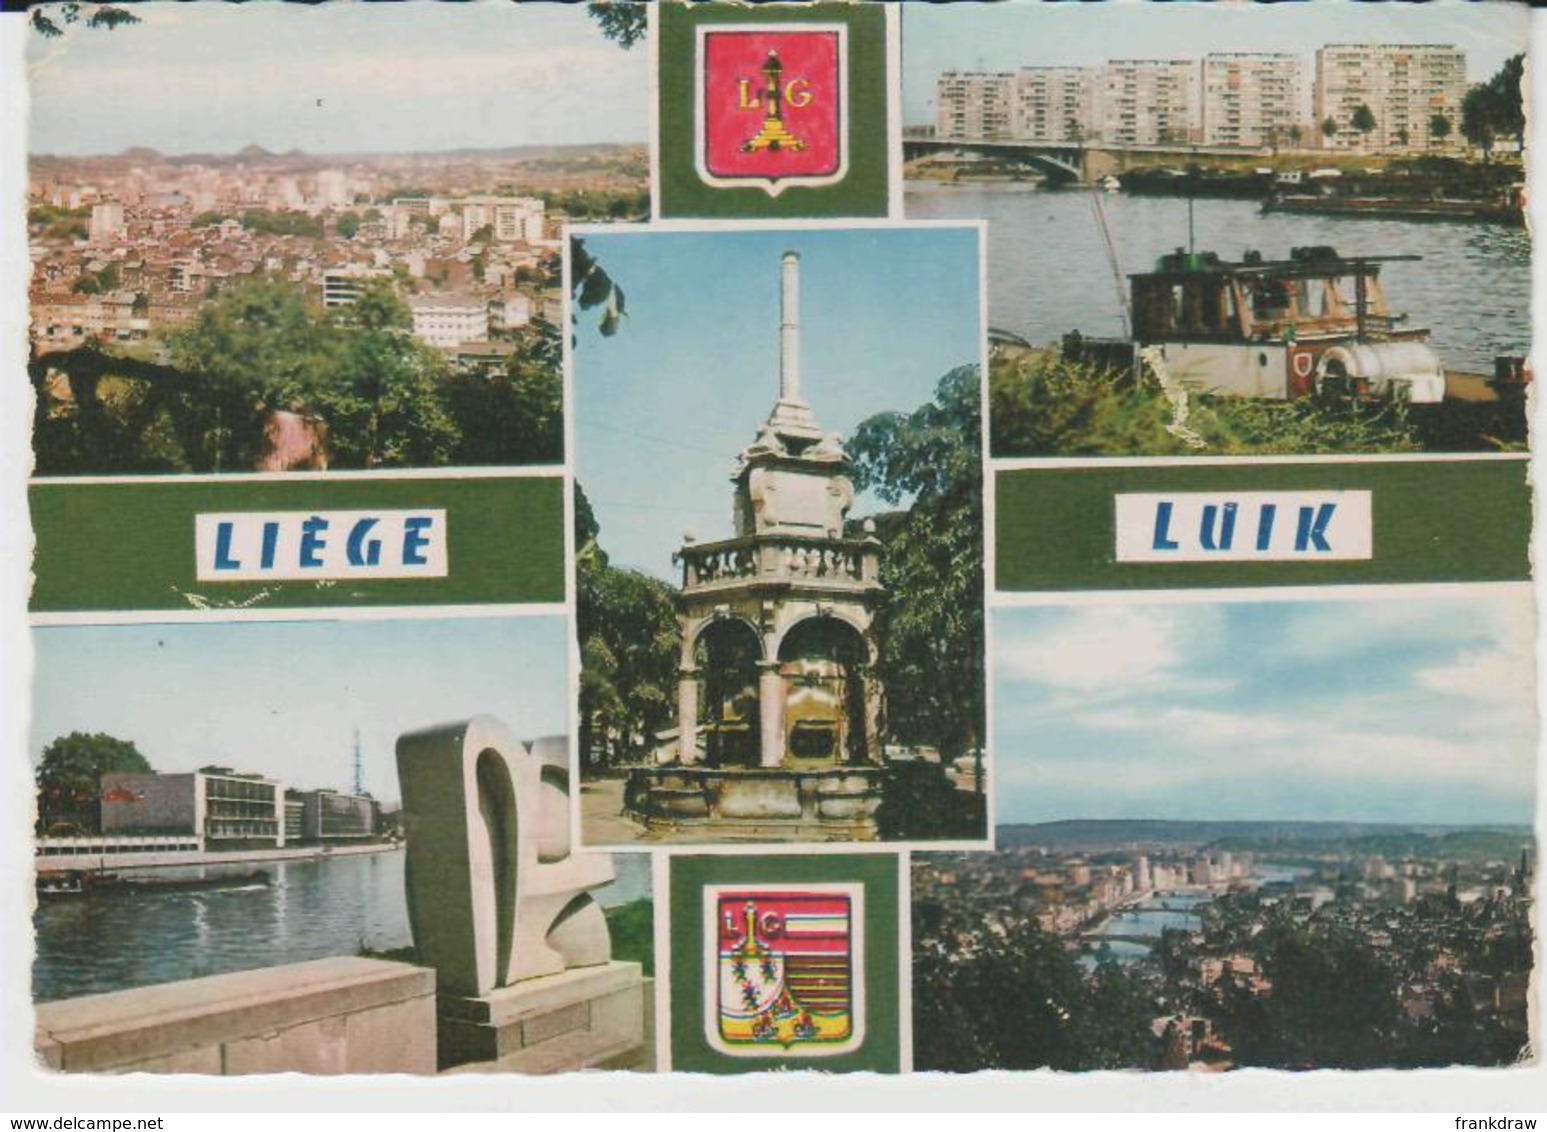 Postcard - Liege - Luik5 Views - Posted  29th Oct 1965 Very Good - Unclassified